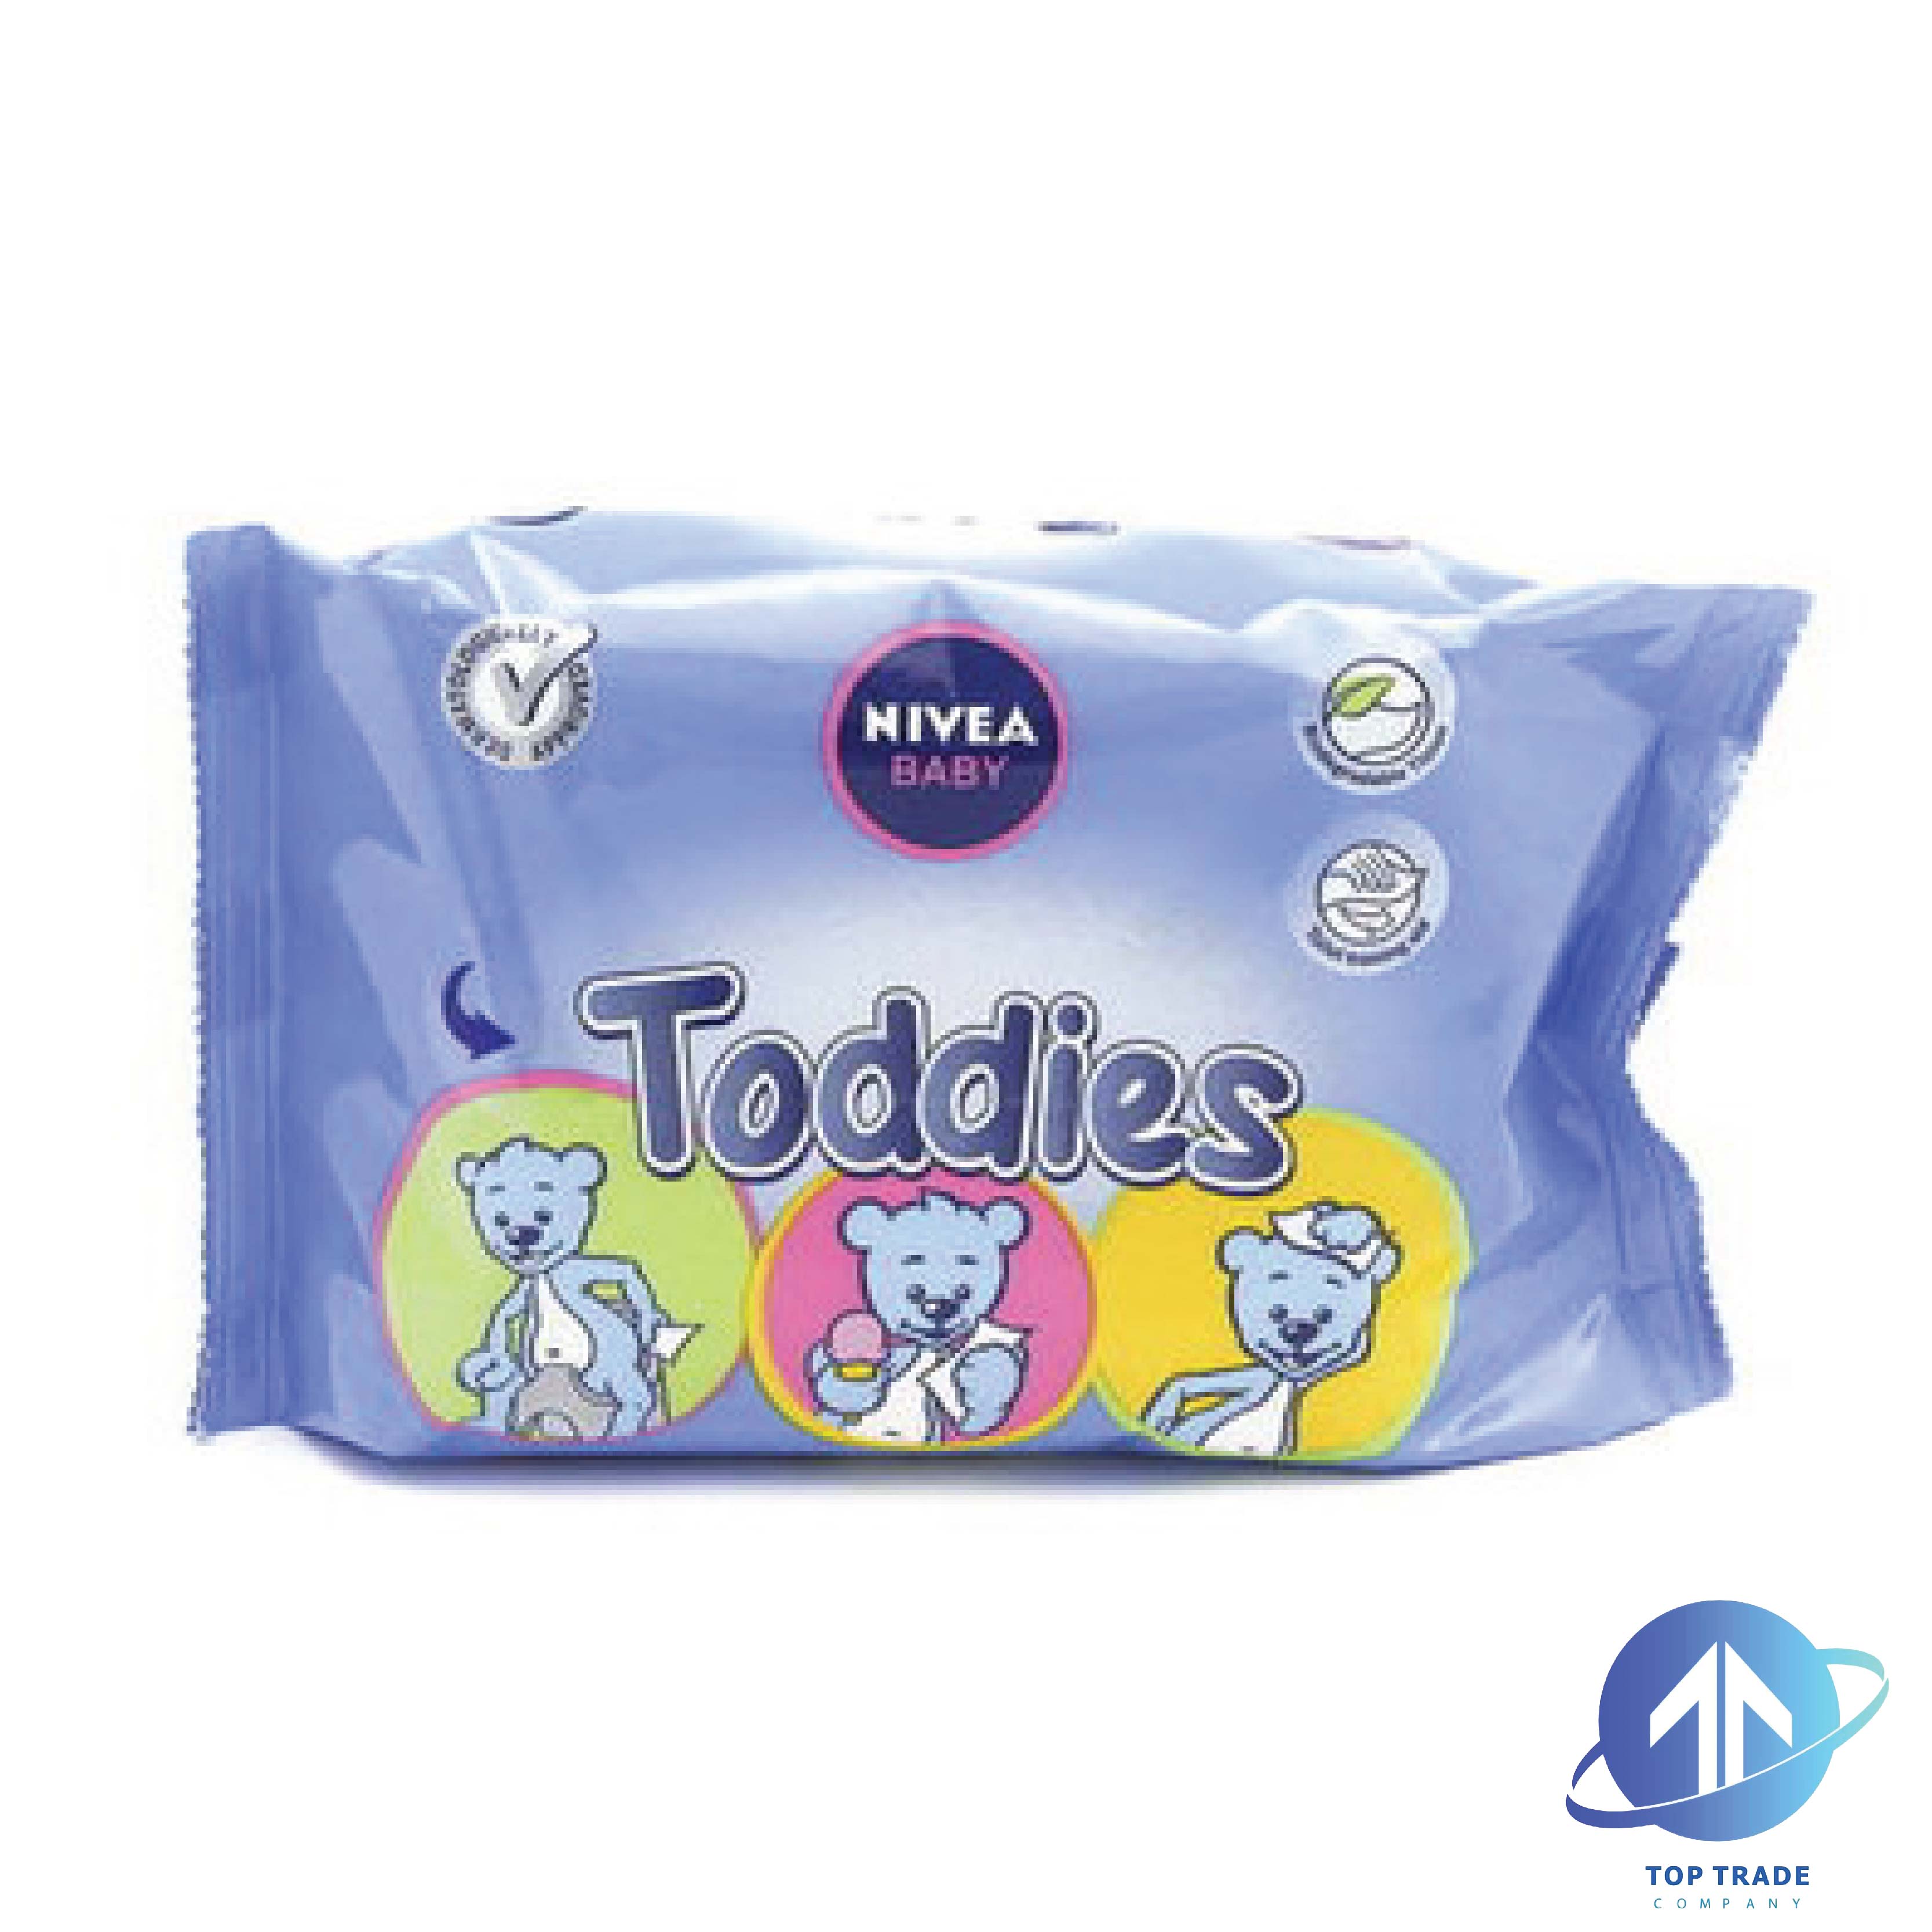 Nivea baby wipes all-in-one 60pcs toddies